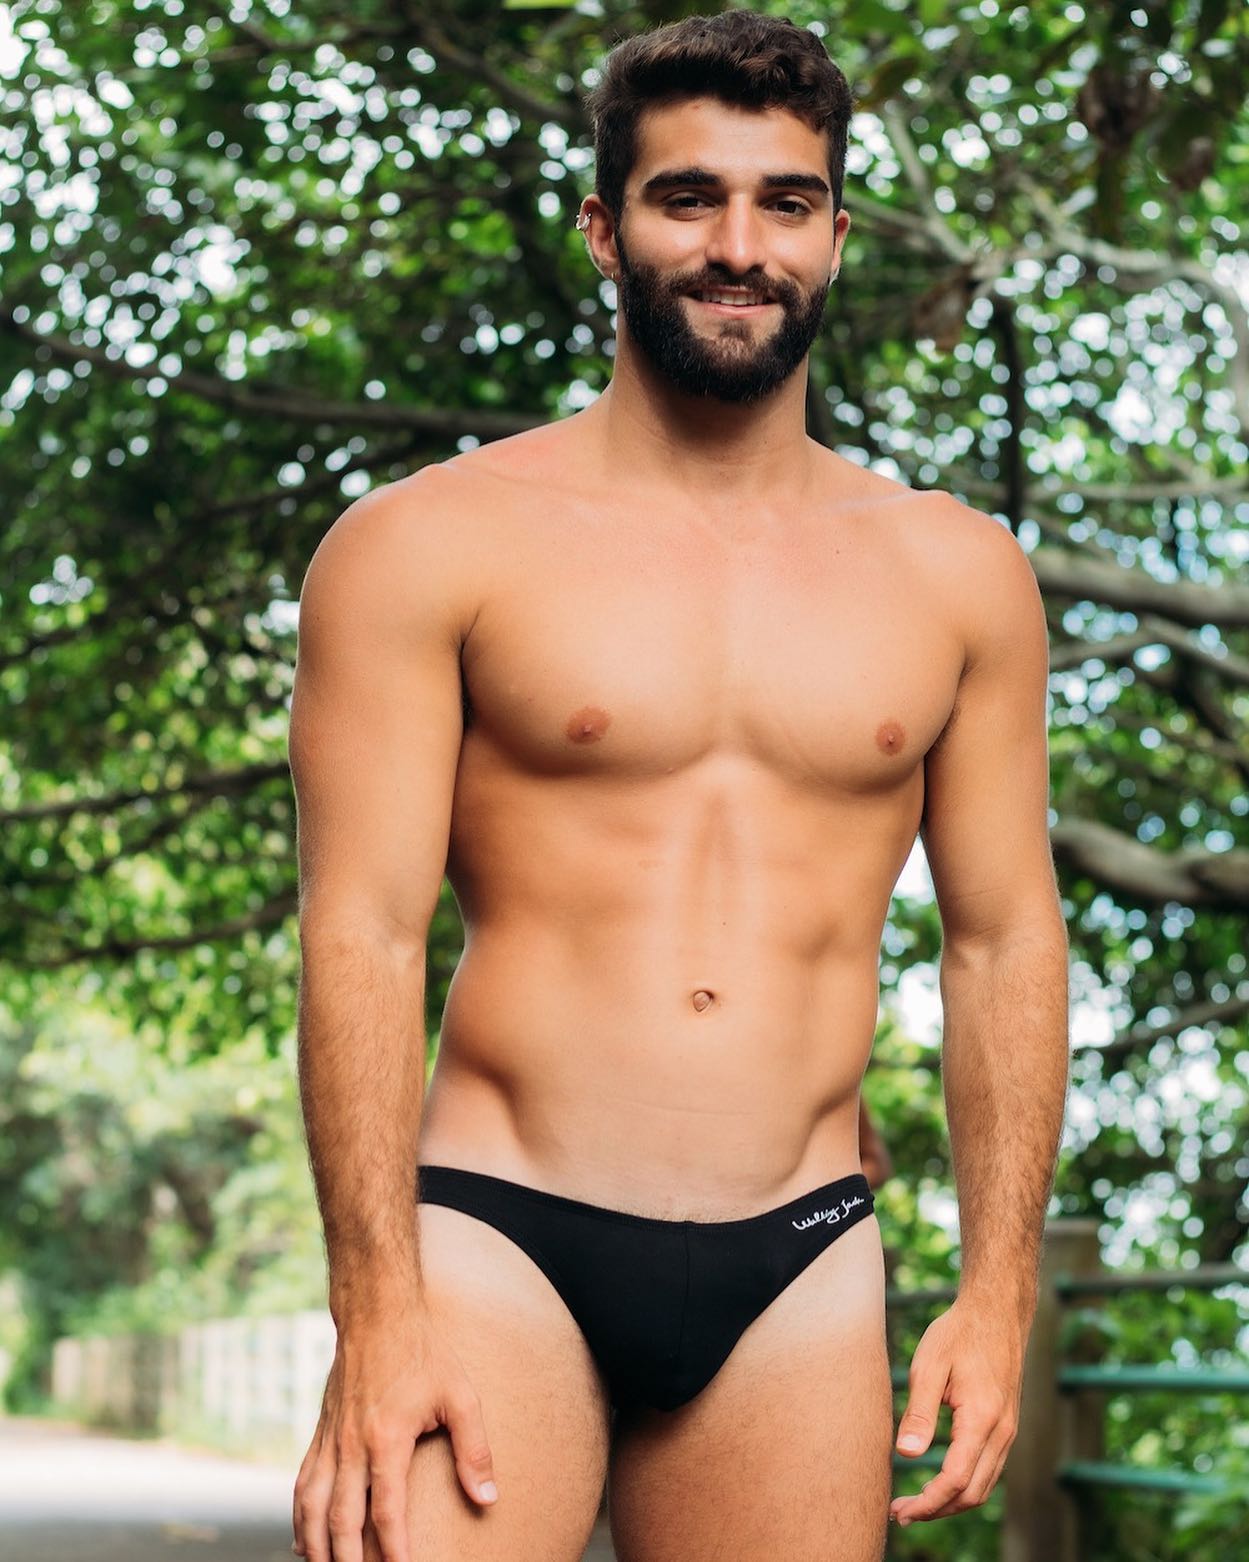 Attention all fashion lovers! 🔥 The Greek brand Walking Jack has released their hottest creation yet - the Micro Briefs! But hurry, stocks are running low! Made with organic cotton, these super low-rise briefs come in four bold colours and five different sizes. They offer minimal coverage while still being full-on sexy. Don't miss out on this must-have addition to your wardrobe! 😉
_____
menandunderwear.com/shop